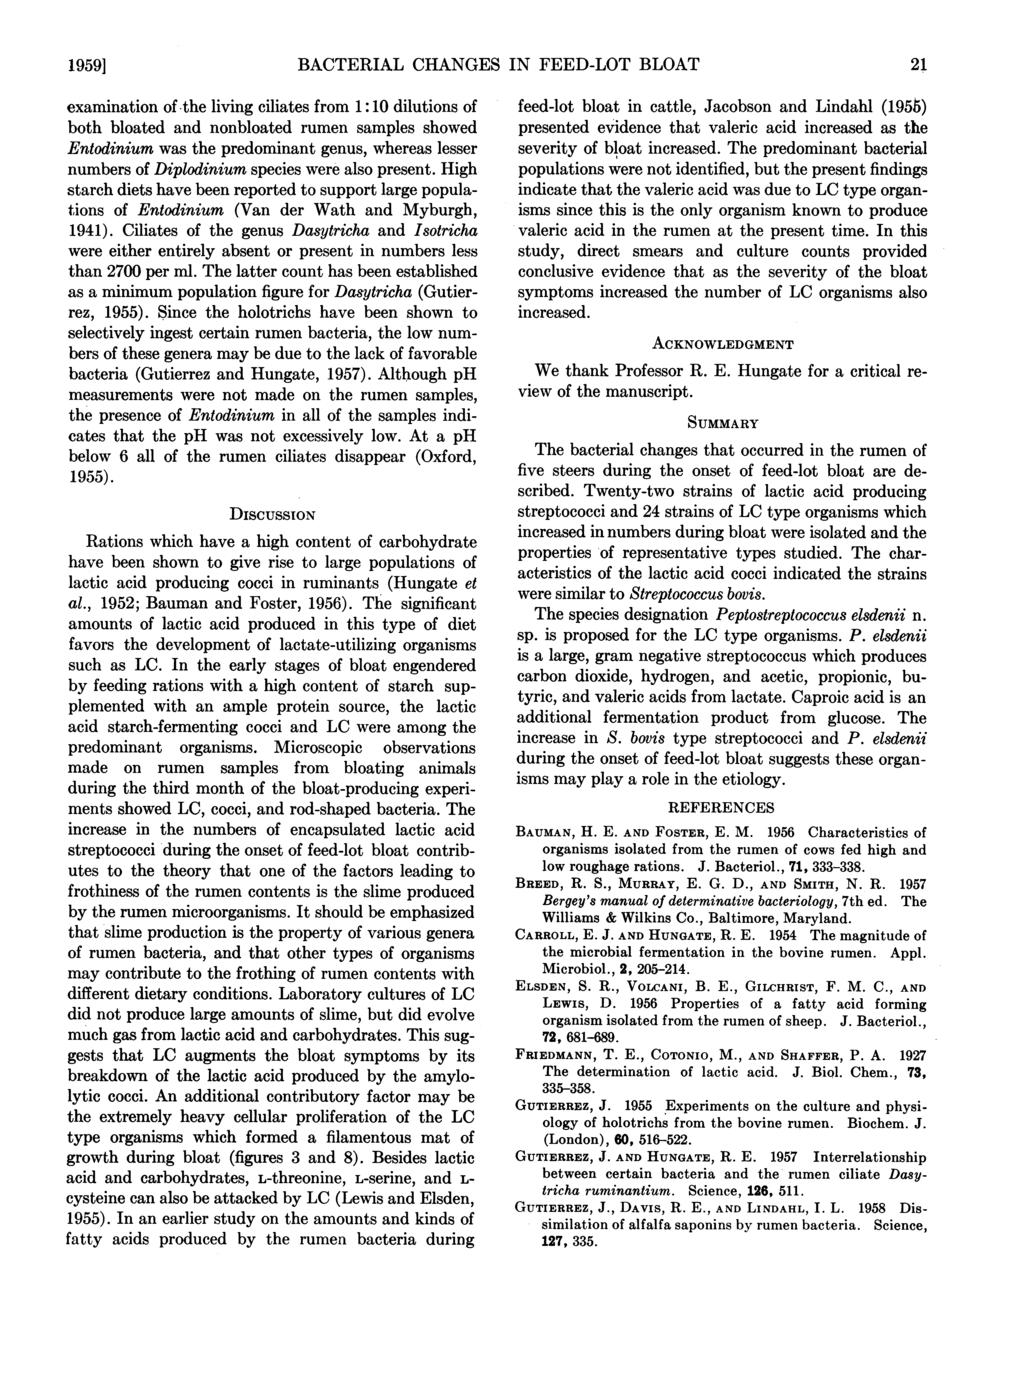 19591 BACTERIAL CHANGES IN FEED-LOT BLOAT 21 examination of the living ciliates from 1:10 dilutions of both bloated and nonbloated rumen samples showed Entodinium was the predominant genus, whereas